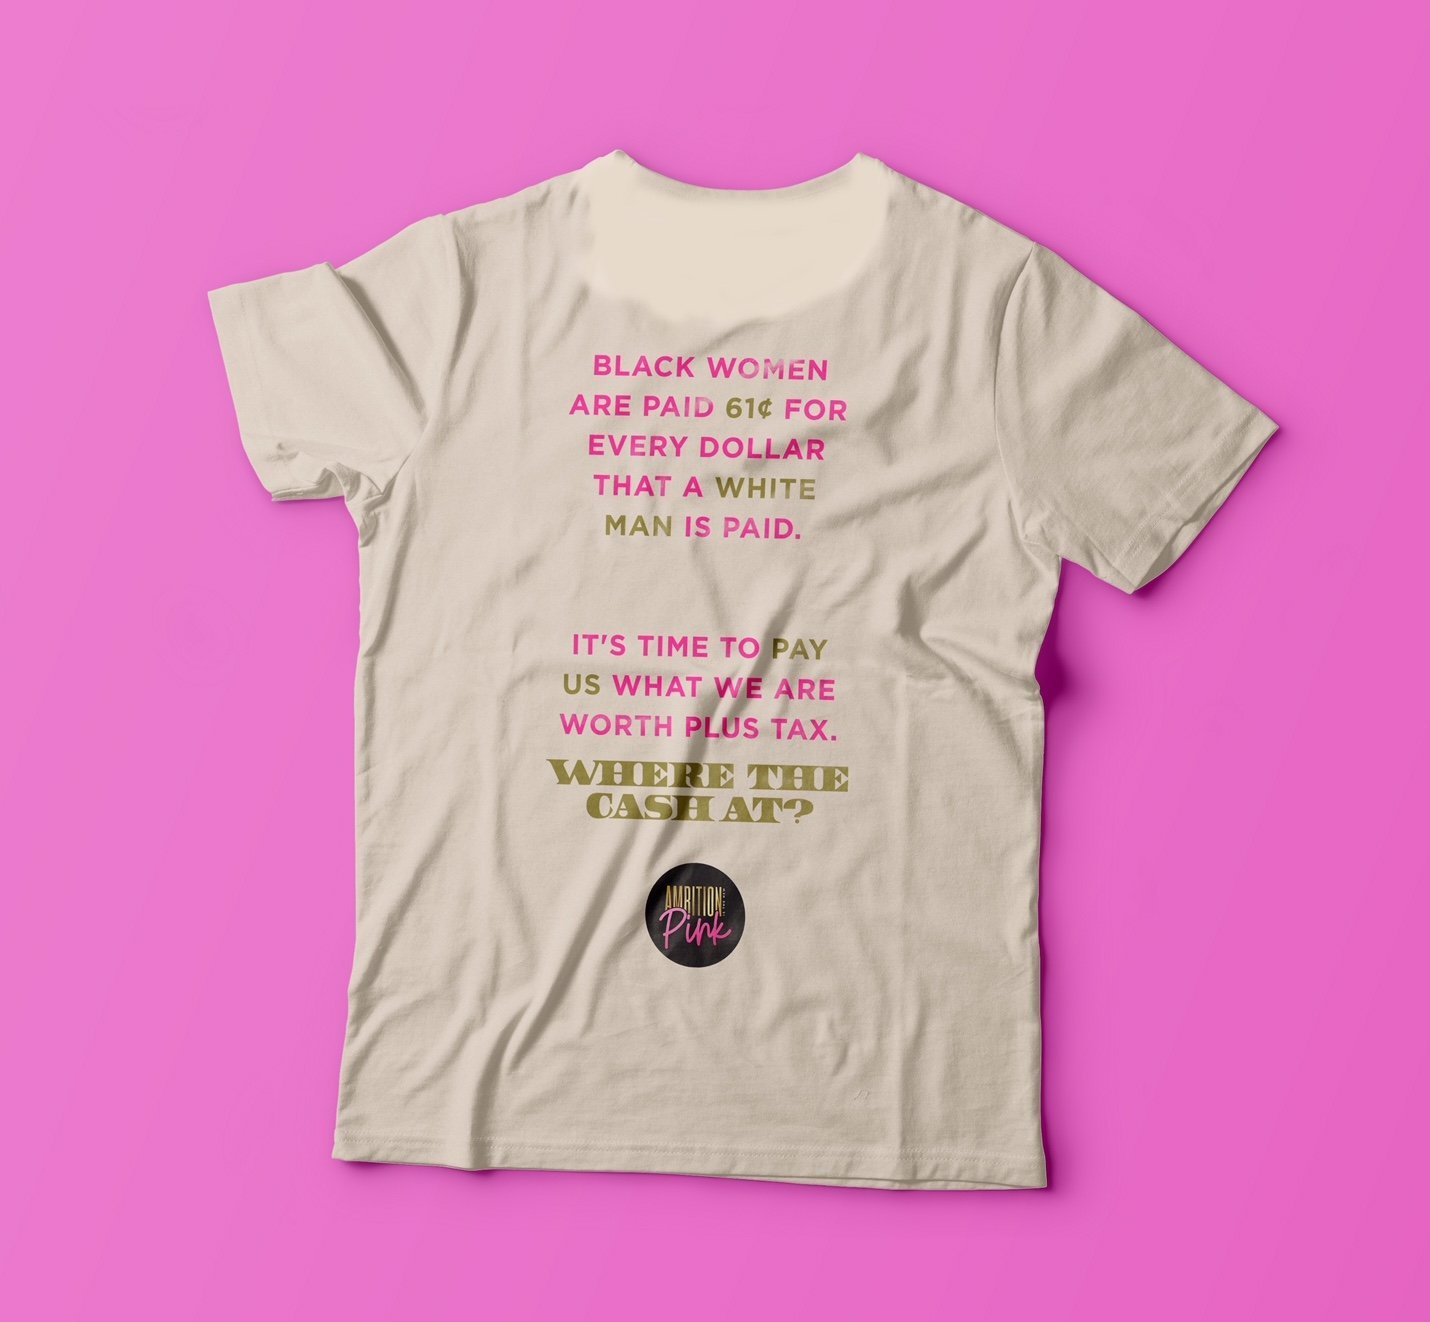 Get Your Money Girl / T-Shirt - Ambition Is The New Pink